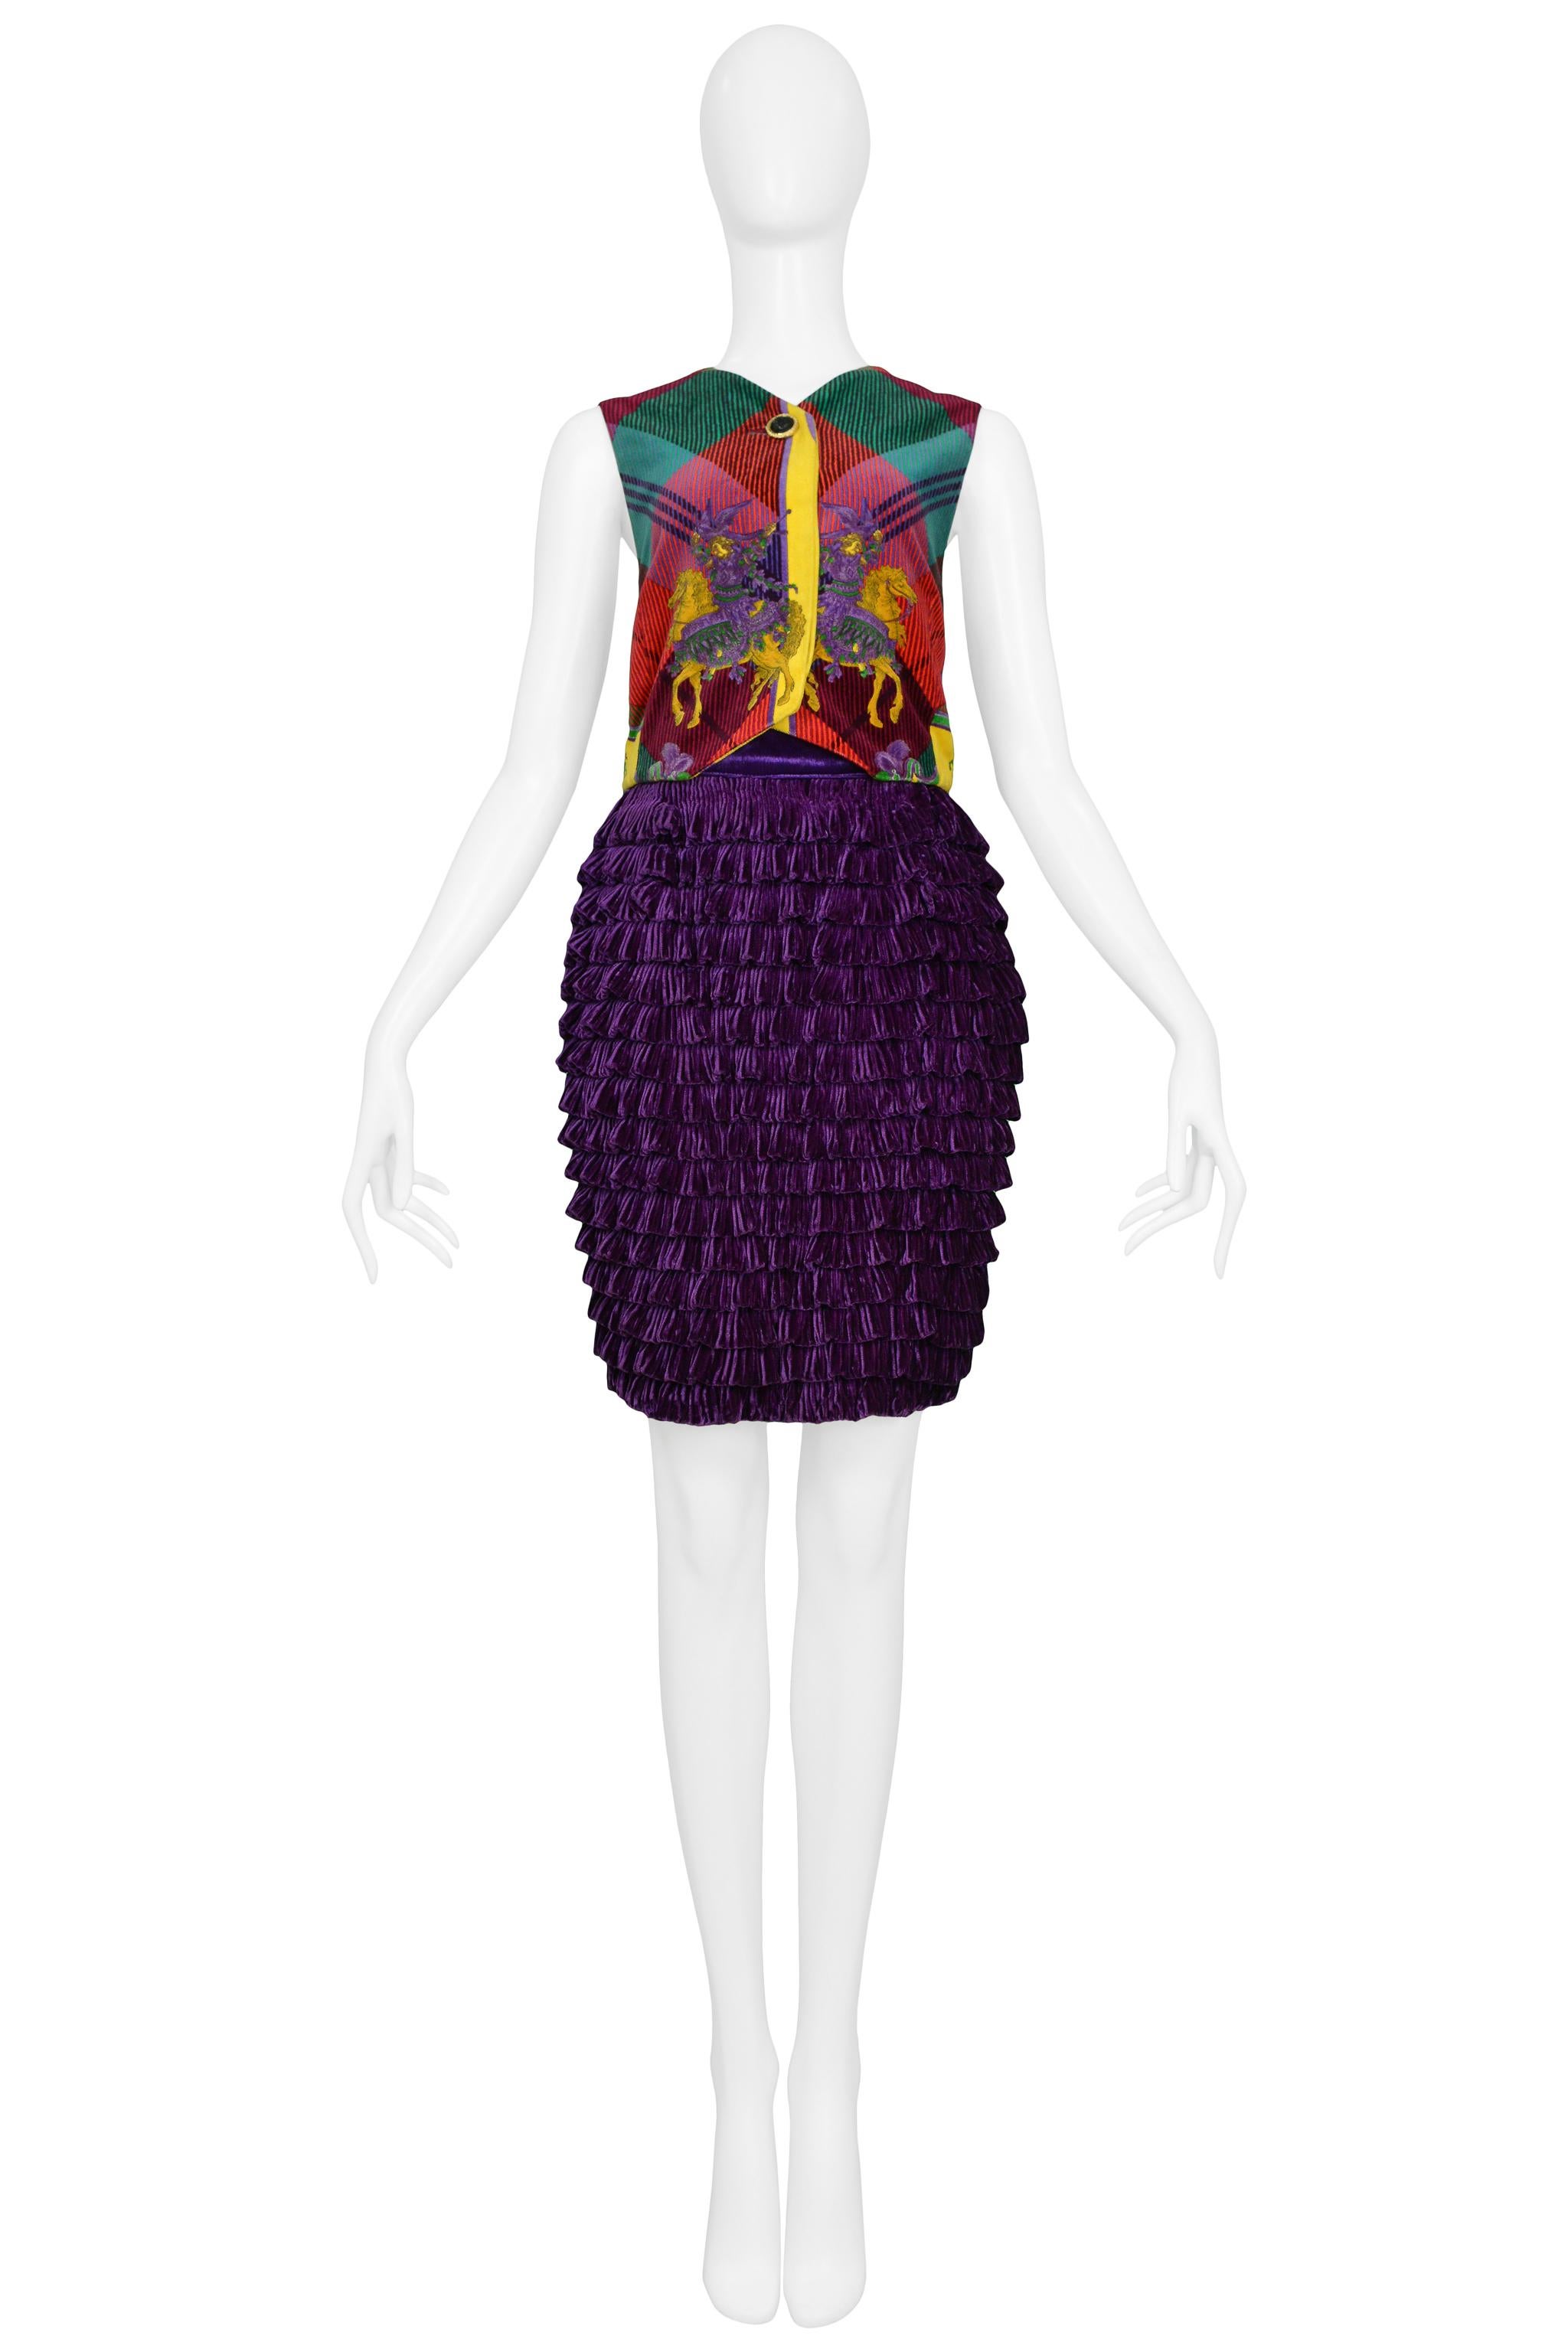 Resurrection Vintage is excited to offer a vintage Versace velvet vest and skirt ensemble featuring a plaid jewel-tone vest with embroidered horses and a purple ruffle skirt. 

Versace 
Size 42
Measurements: Waist: 26 in. (66.04 cm)Hip: 36 in.